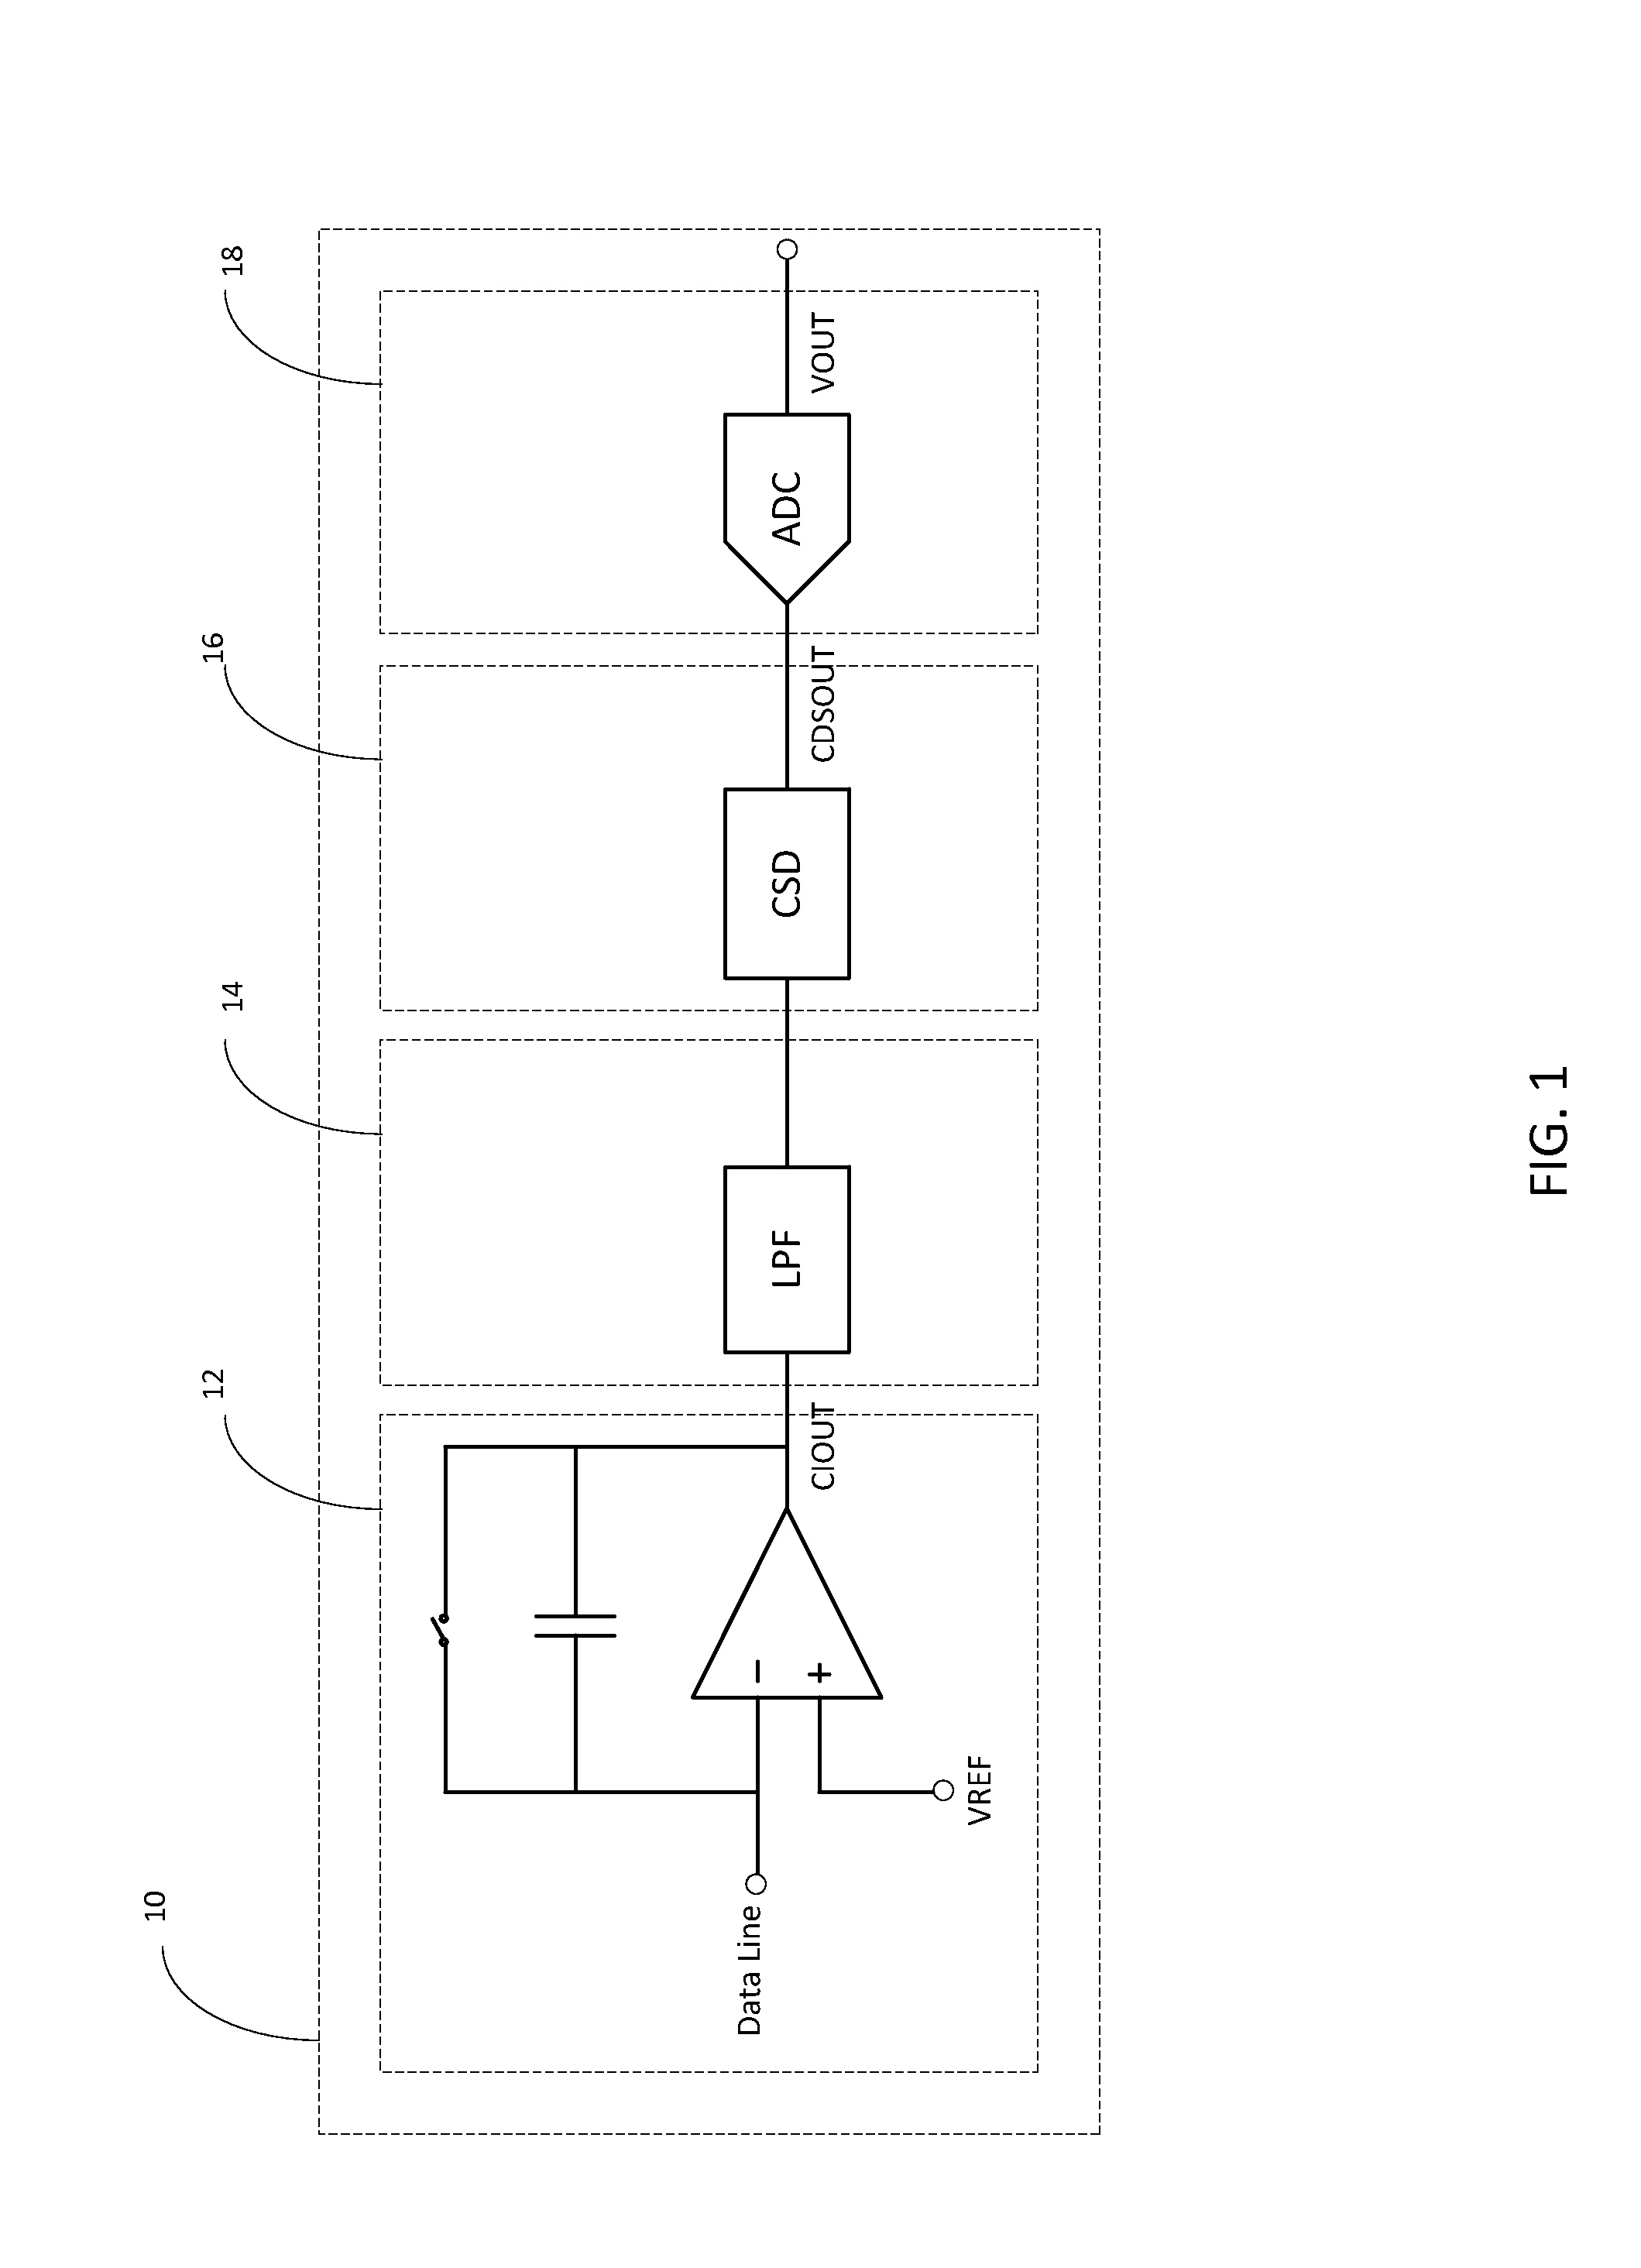 Readout integrated circuit for dynamic imaging